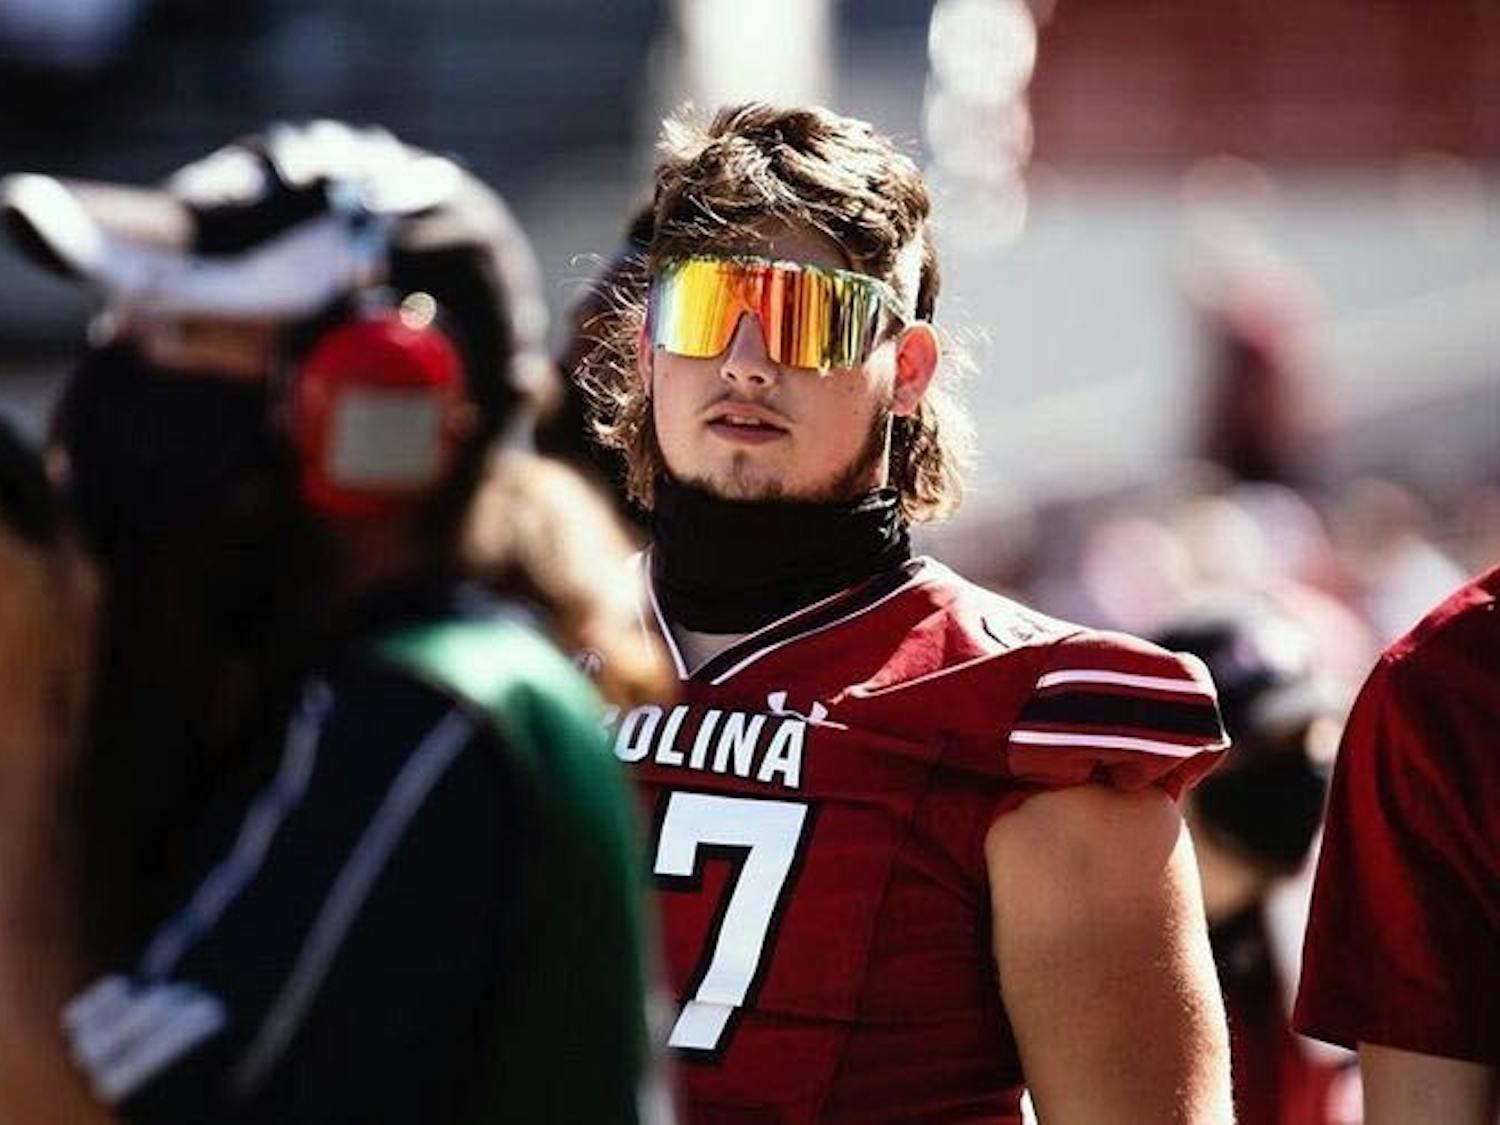 Gavin Bennett, a former member of the Gamecock football team, was recently given the title of "best mullet at USC". Bennett is known for having many different hair styles.